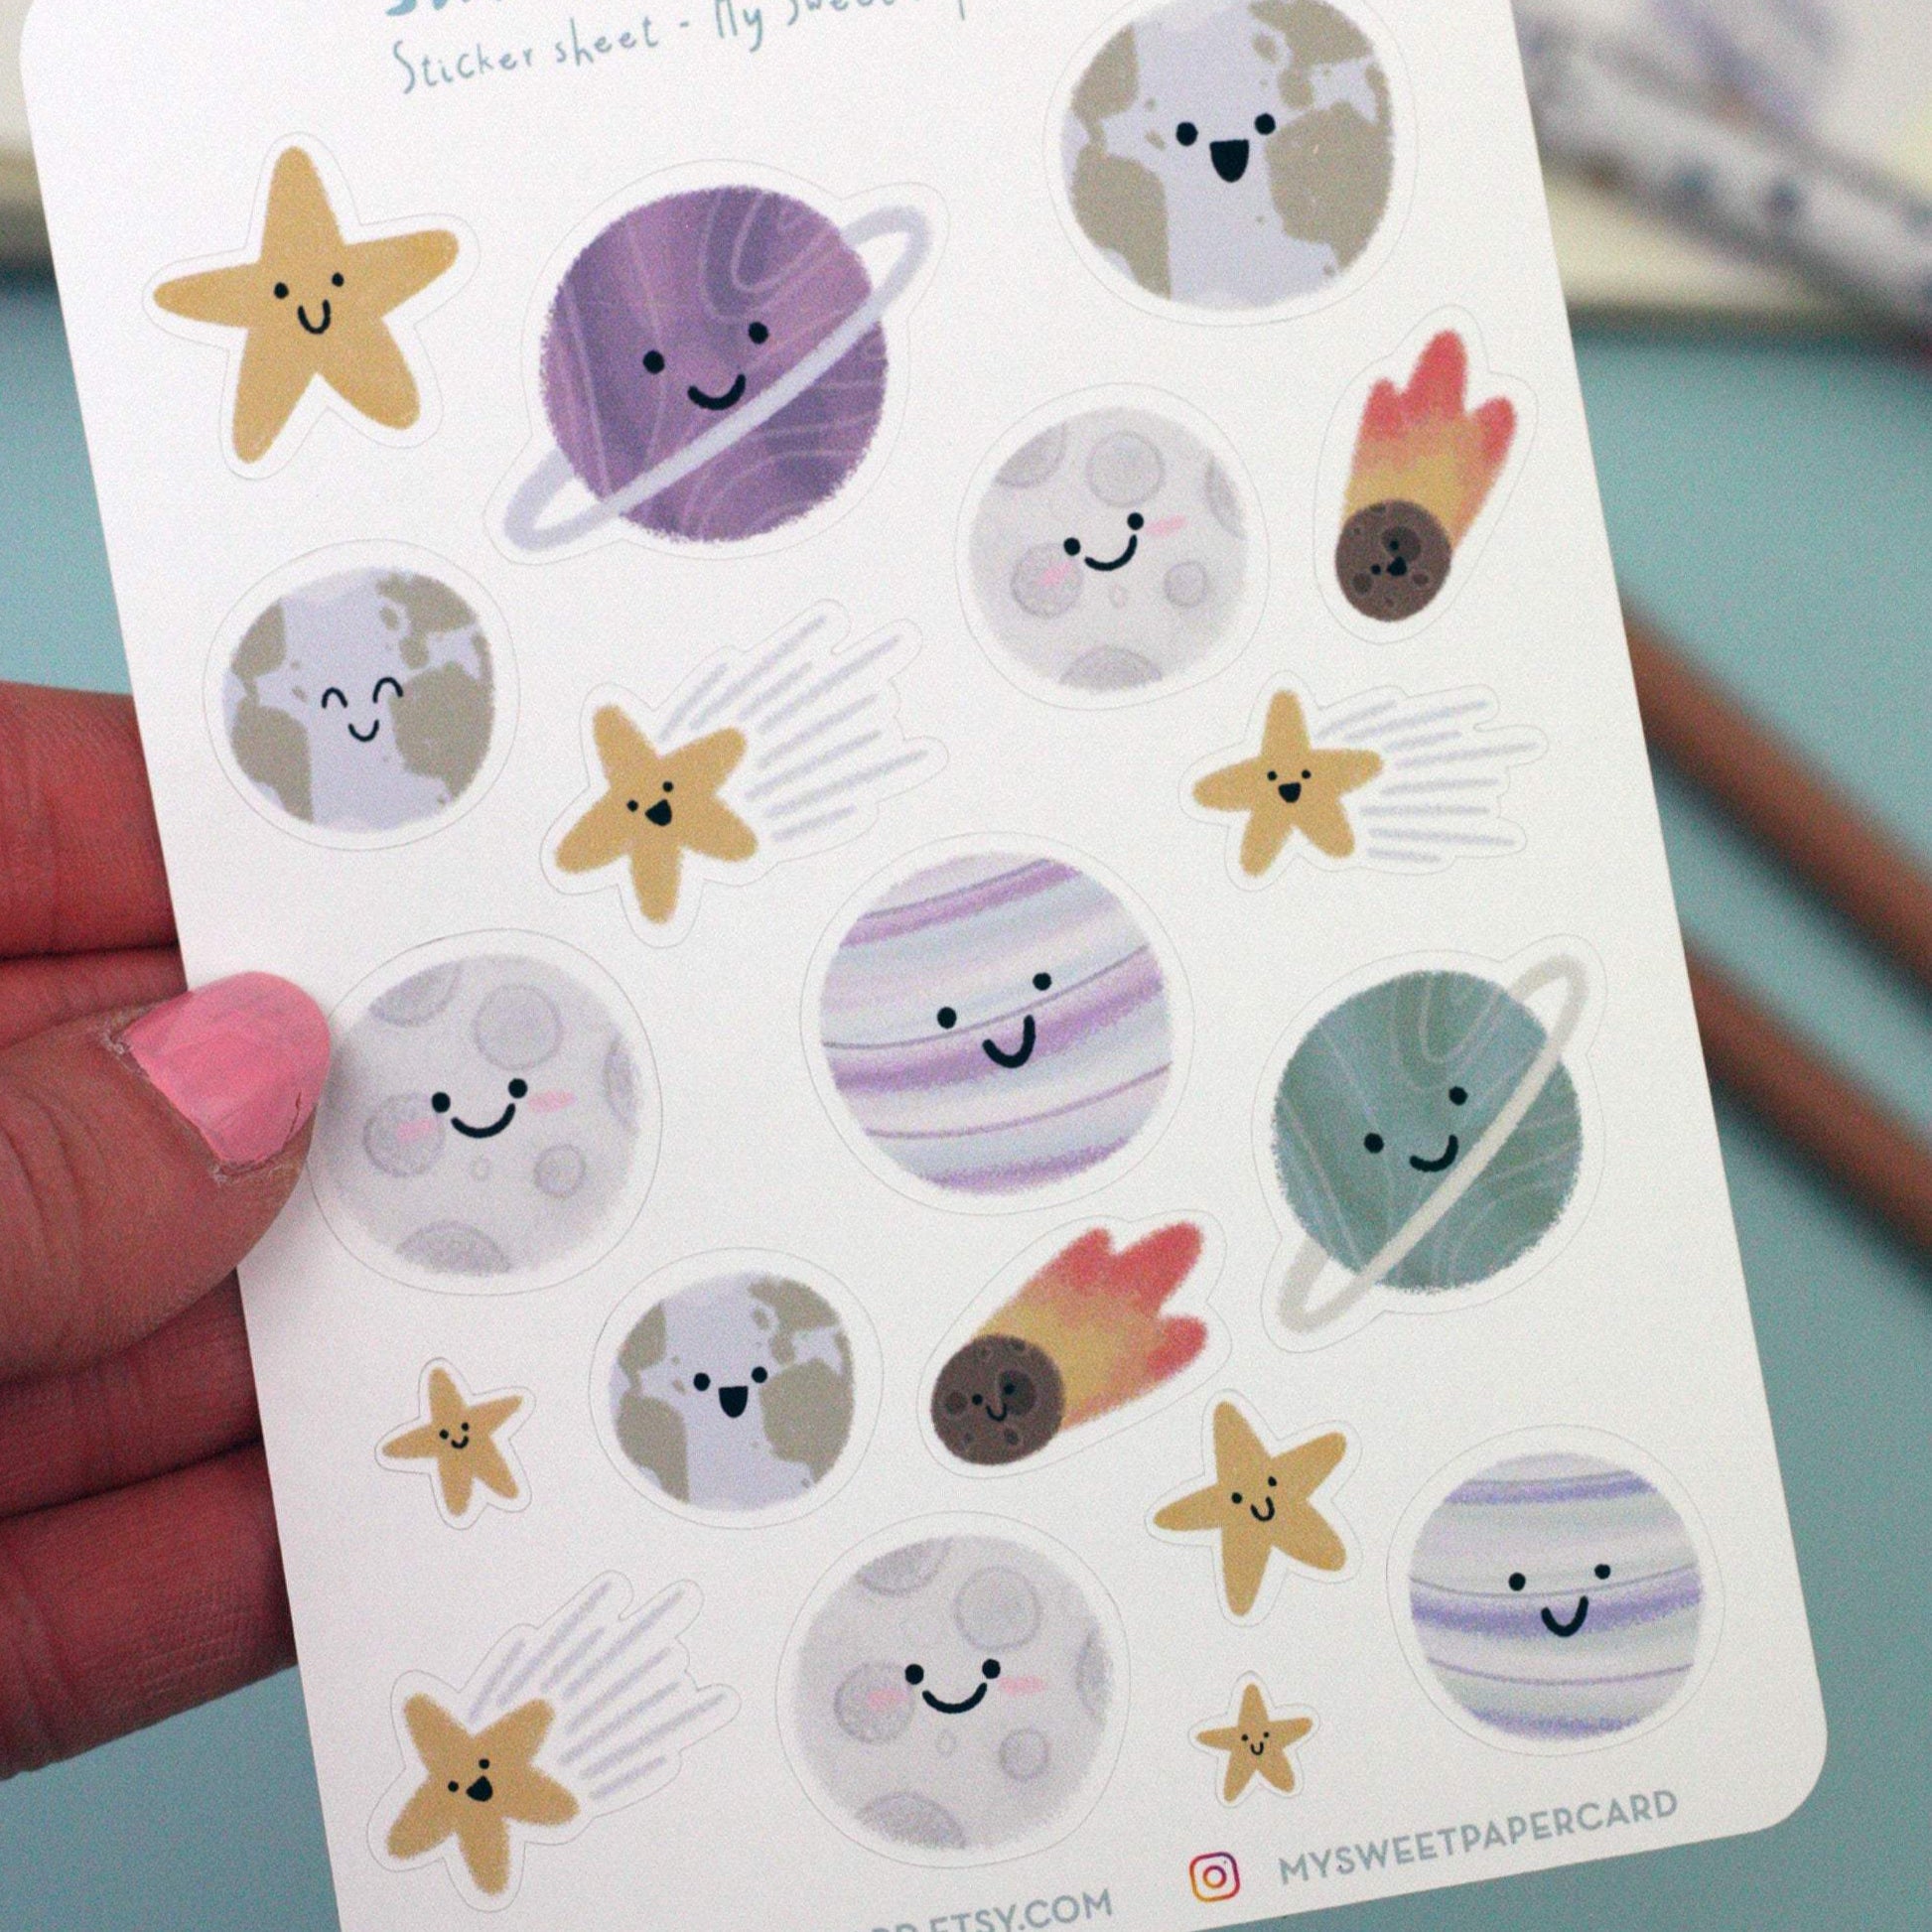 Moon mood stickers - cat planner stickers - bullet journal stickers